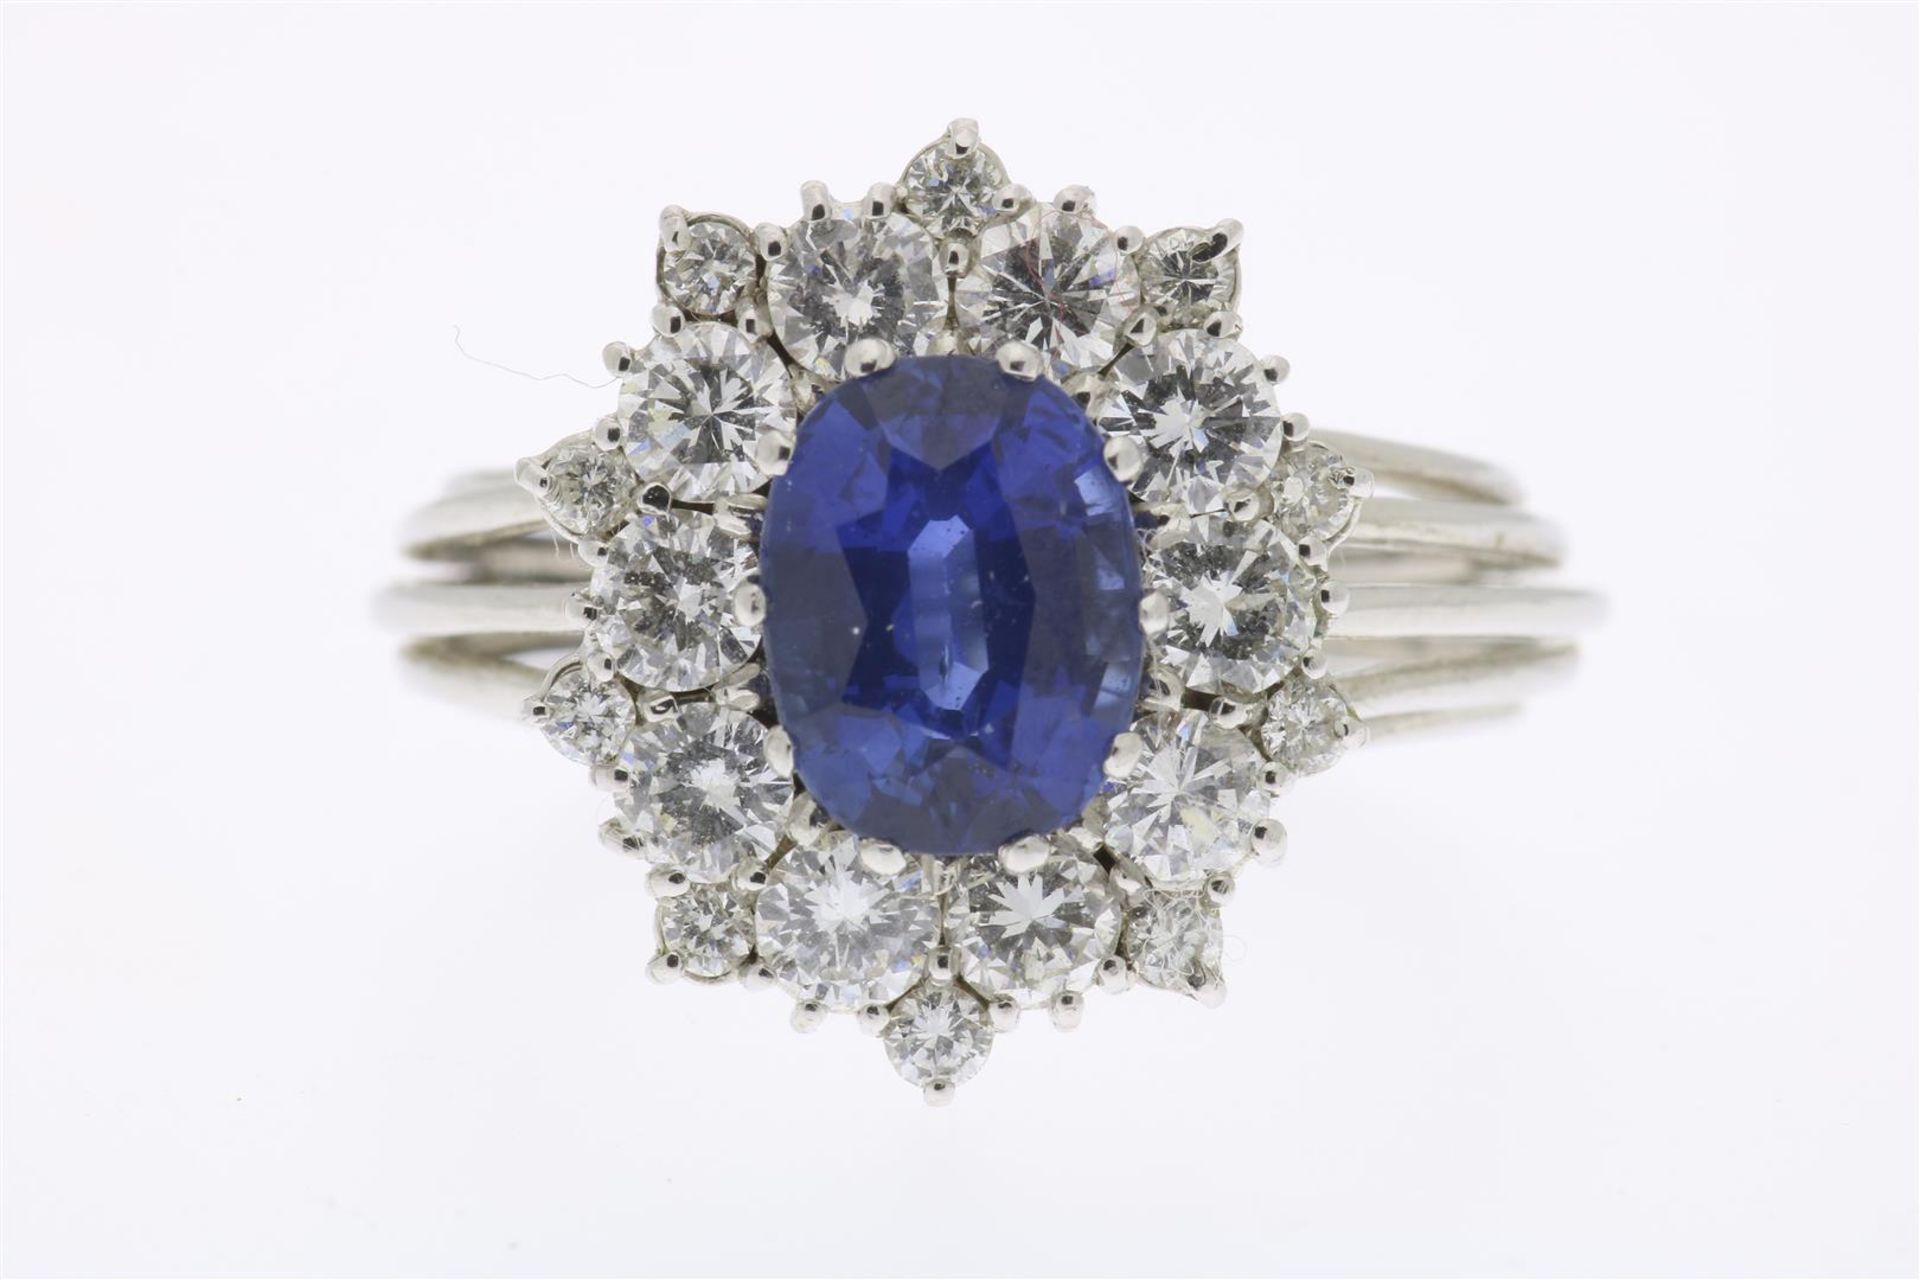 White gold entourage ring set with blue sapphire and brilliant cut diamonds, approx. 1.20 ct. (